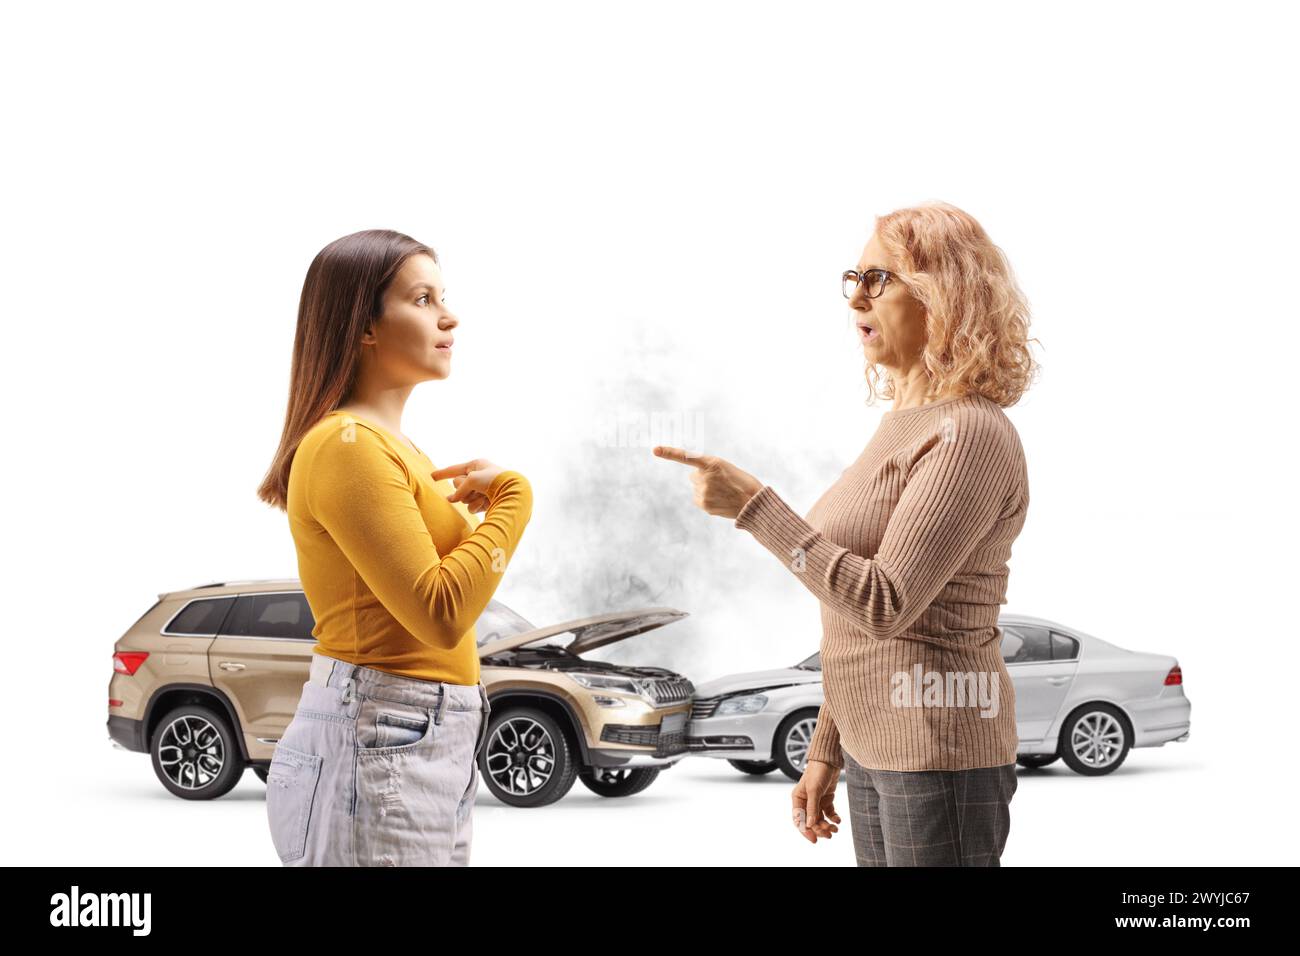 Profile shot of female driver arguing after a car collision isolated on white background Stock Photo